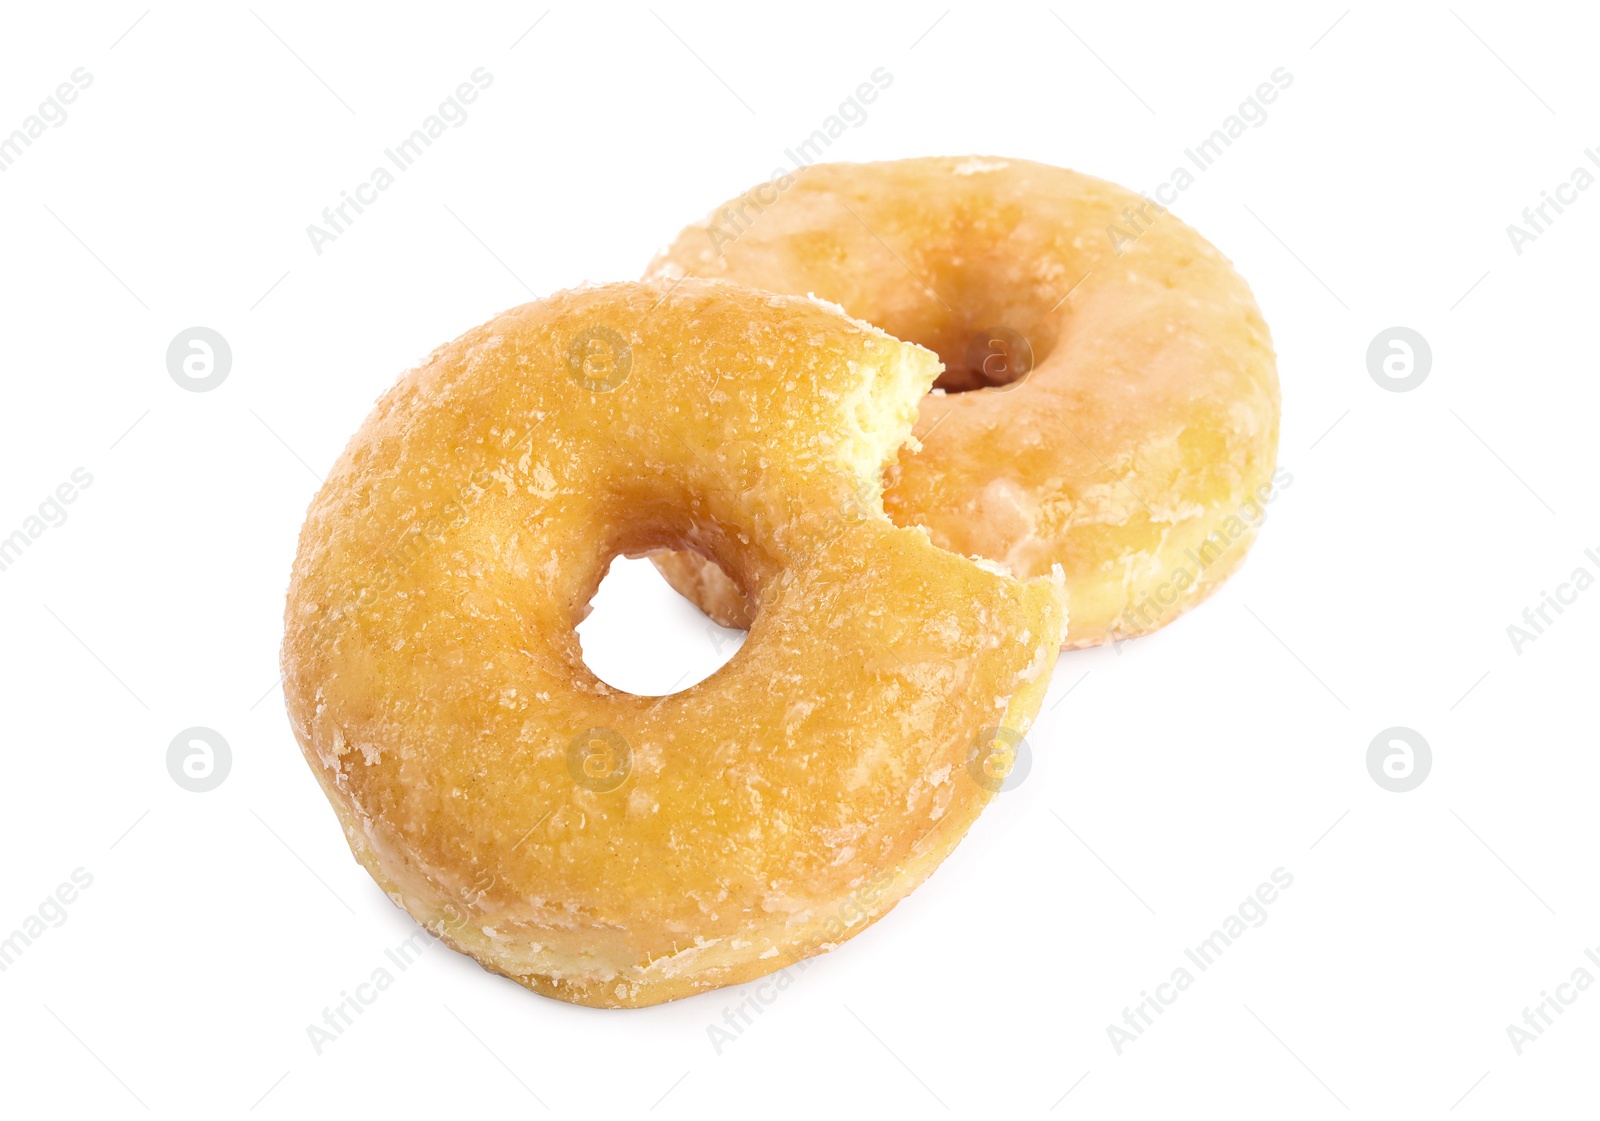 Photo of Sweet delicious glazed donuts on white background